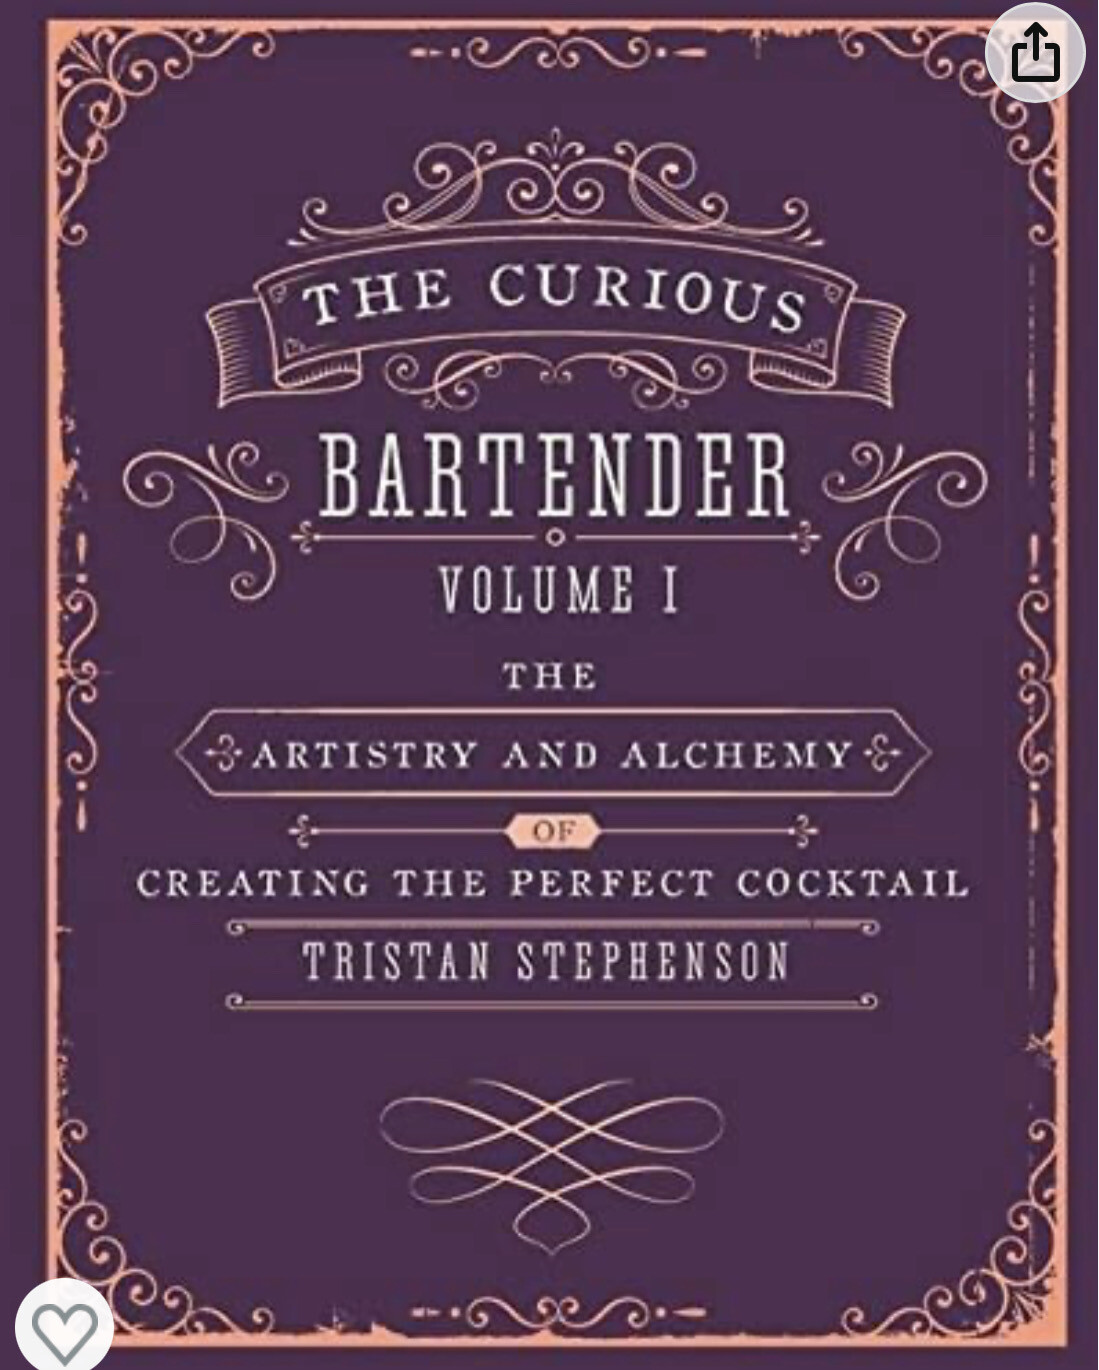 The Curious Bartender. Volume 1. The Artistry And Alchemy Of Creating The Perfect Cocktail